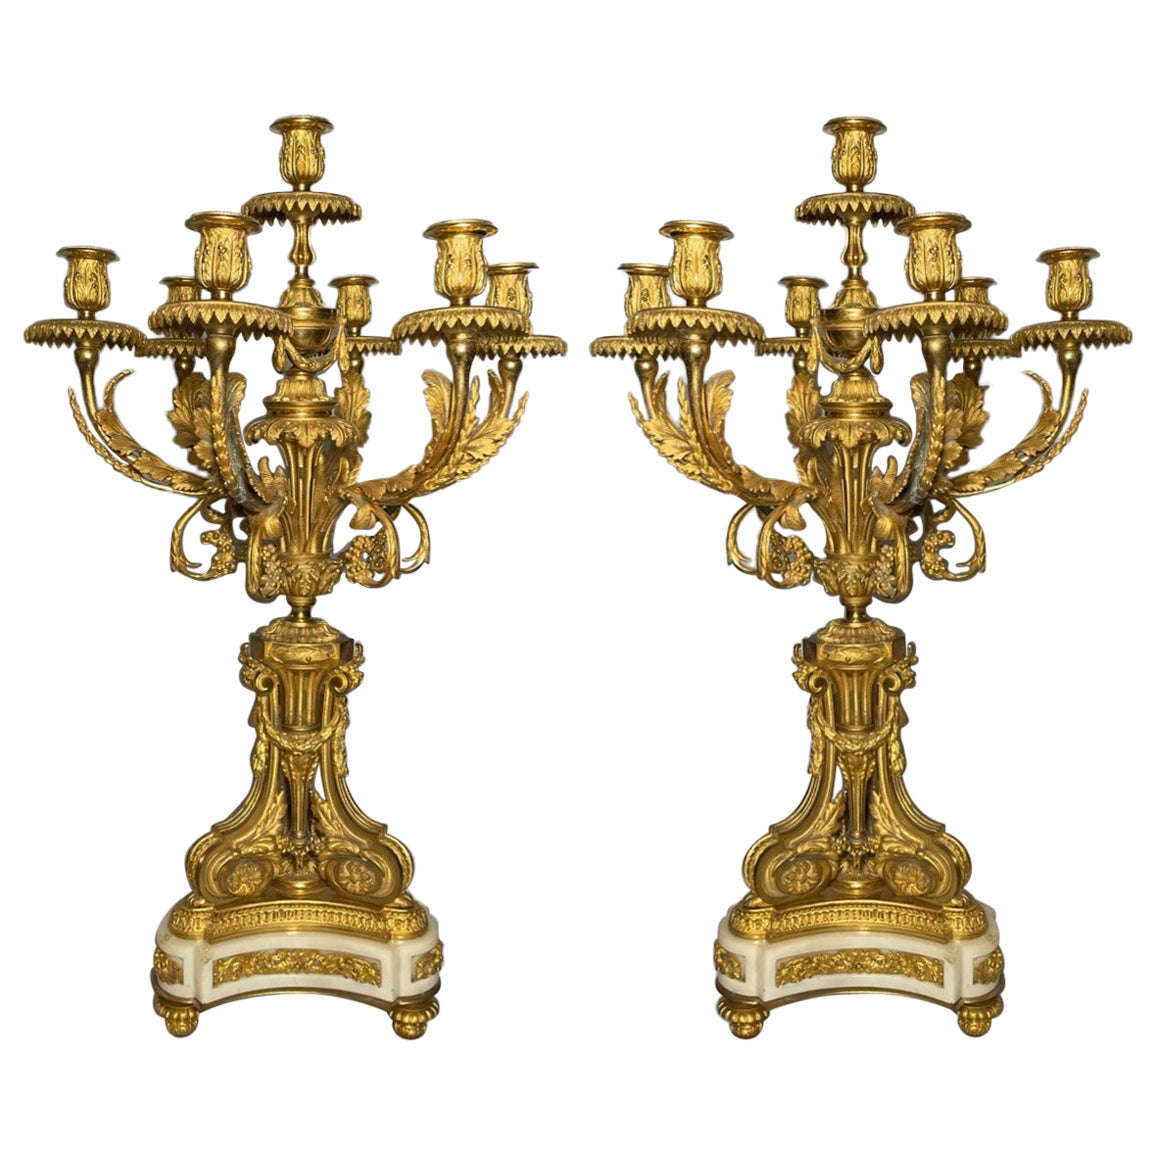 Pair of Antique French Louis XVI Gold-Bronze Carrara Marble Candelabra For Sale